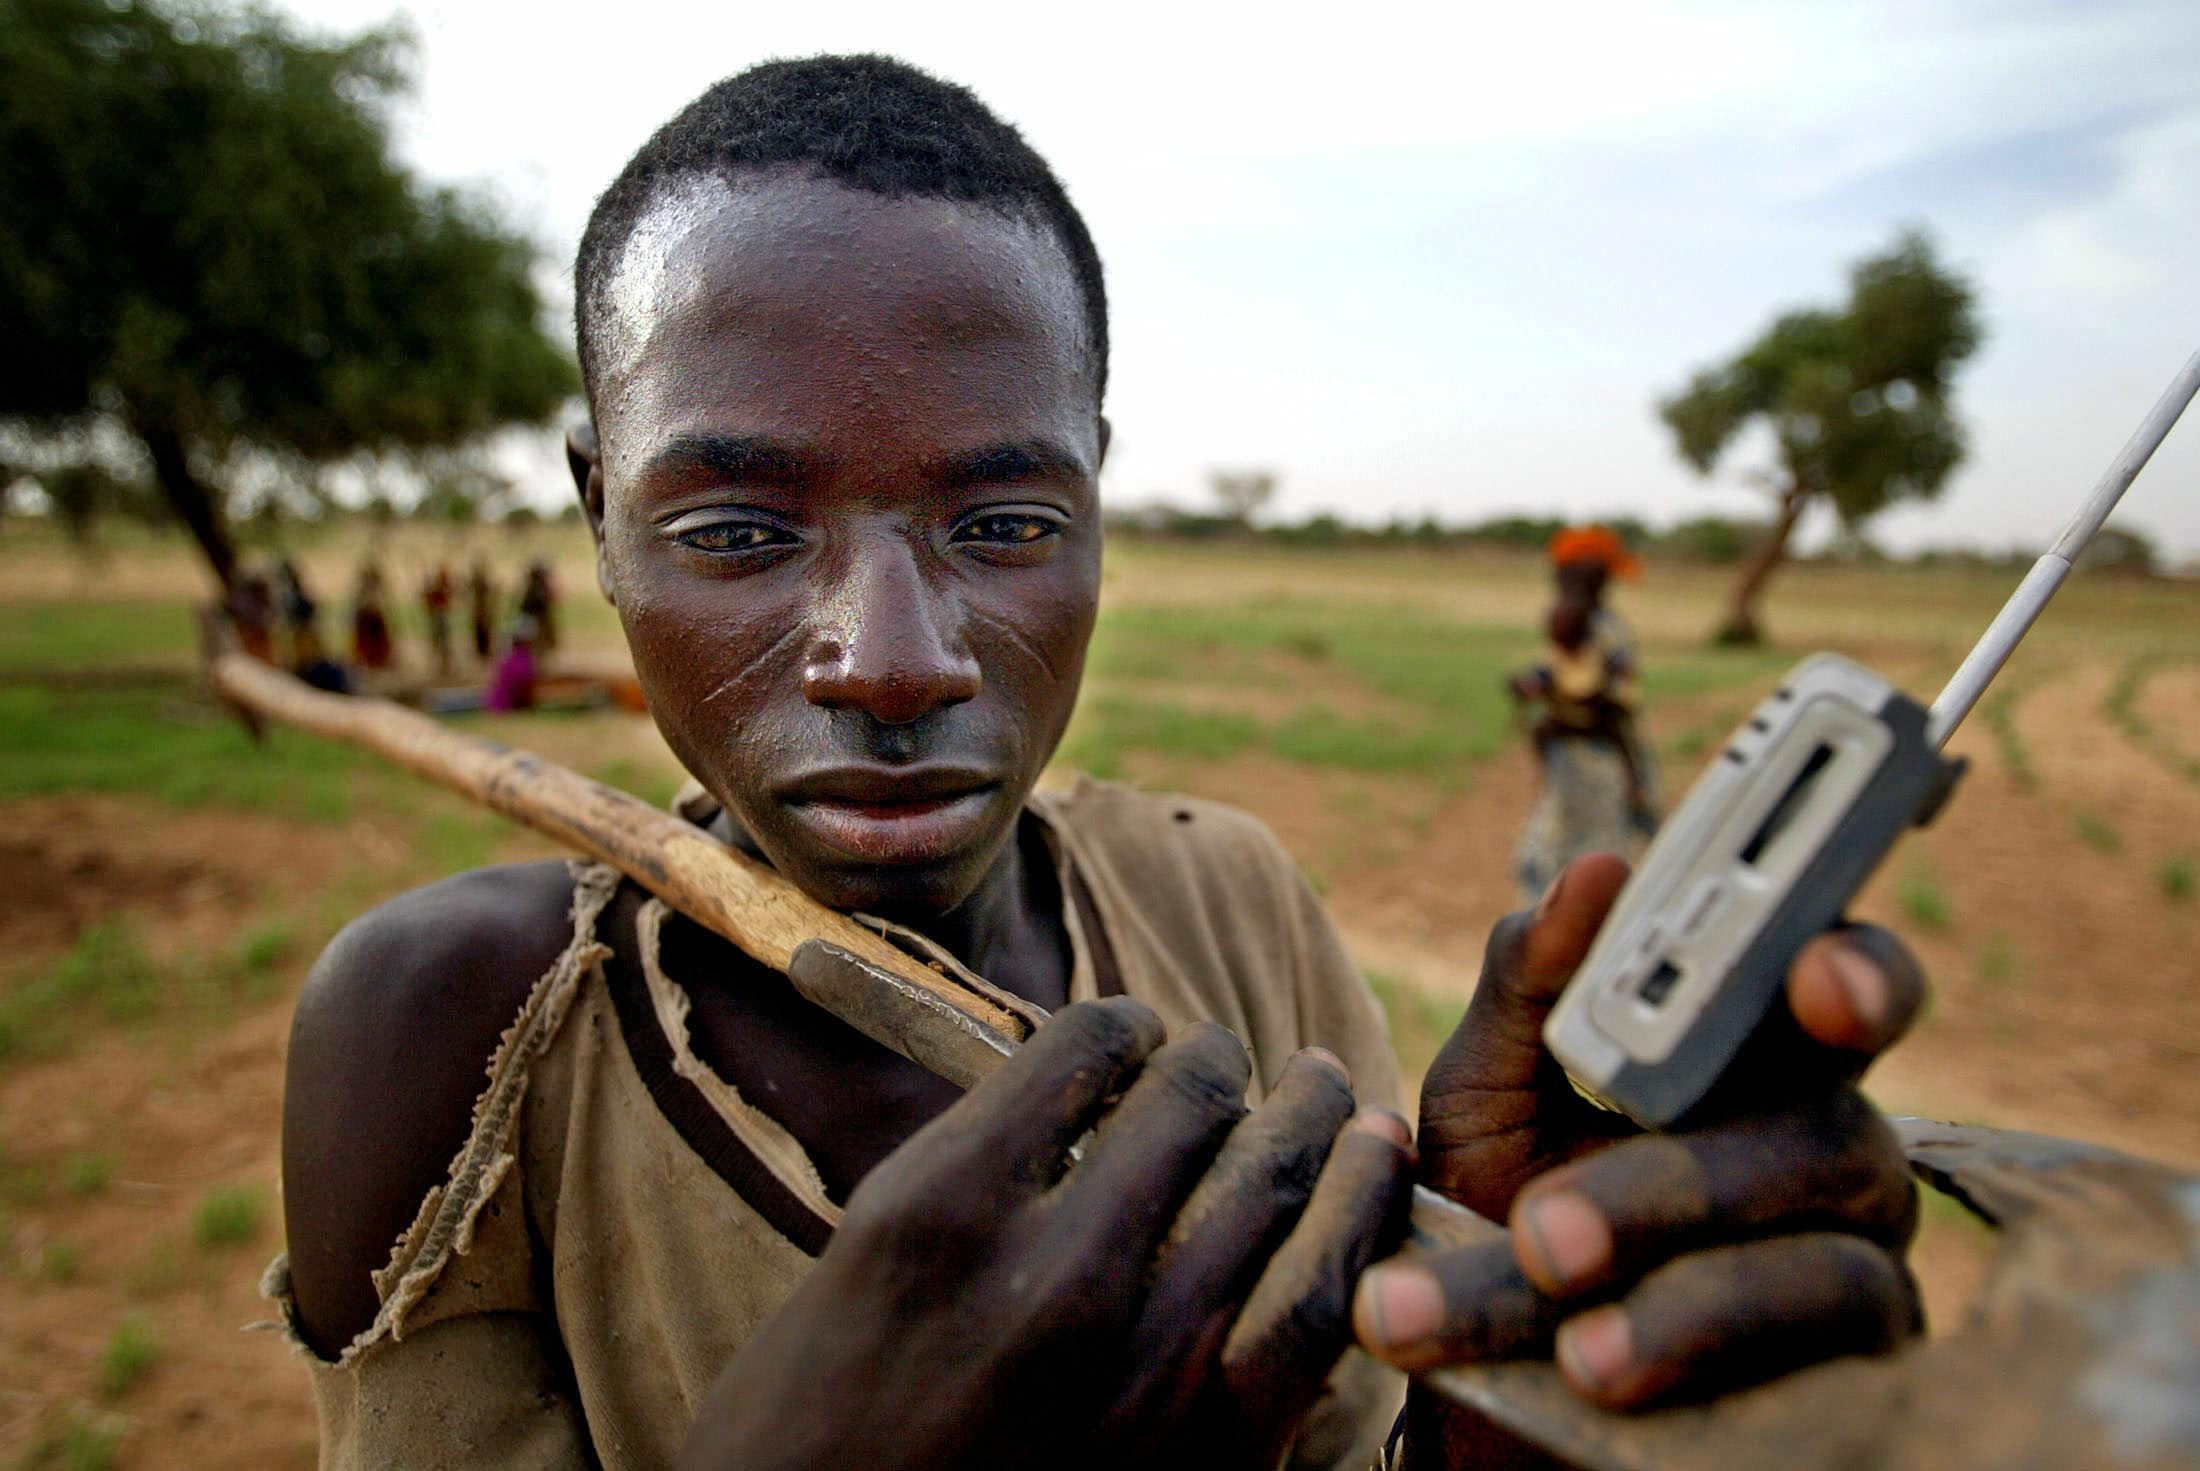 A farmer listens to his transistor radio as he returns home from work near the village of Koumboula in southern Niger June 30, 2005., REUTERS/Finbarr O'Reilly